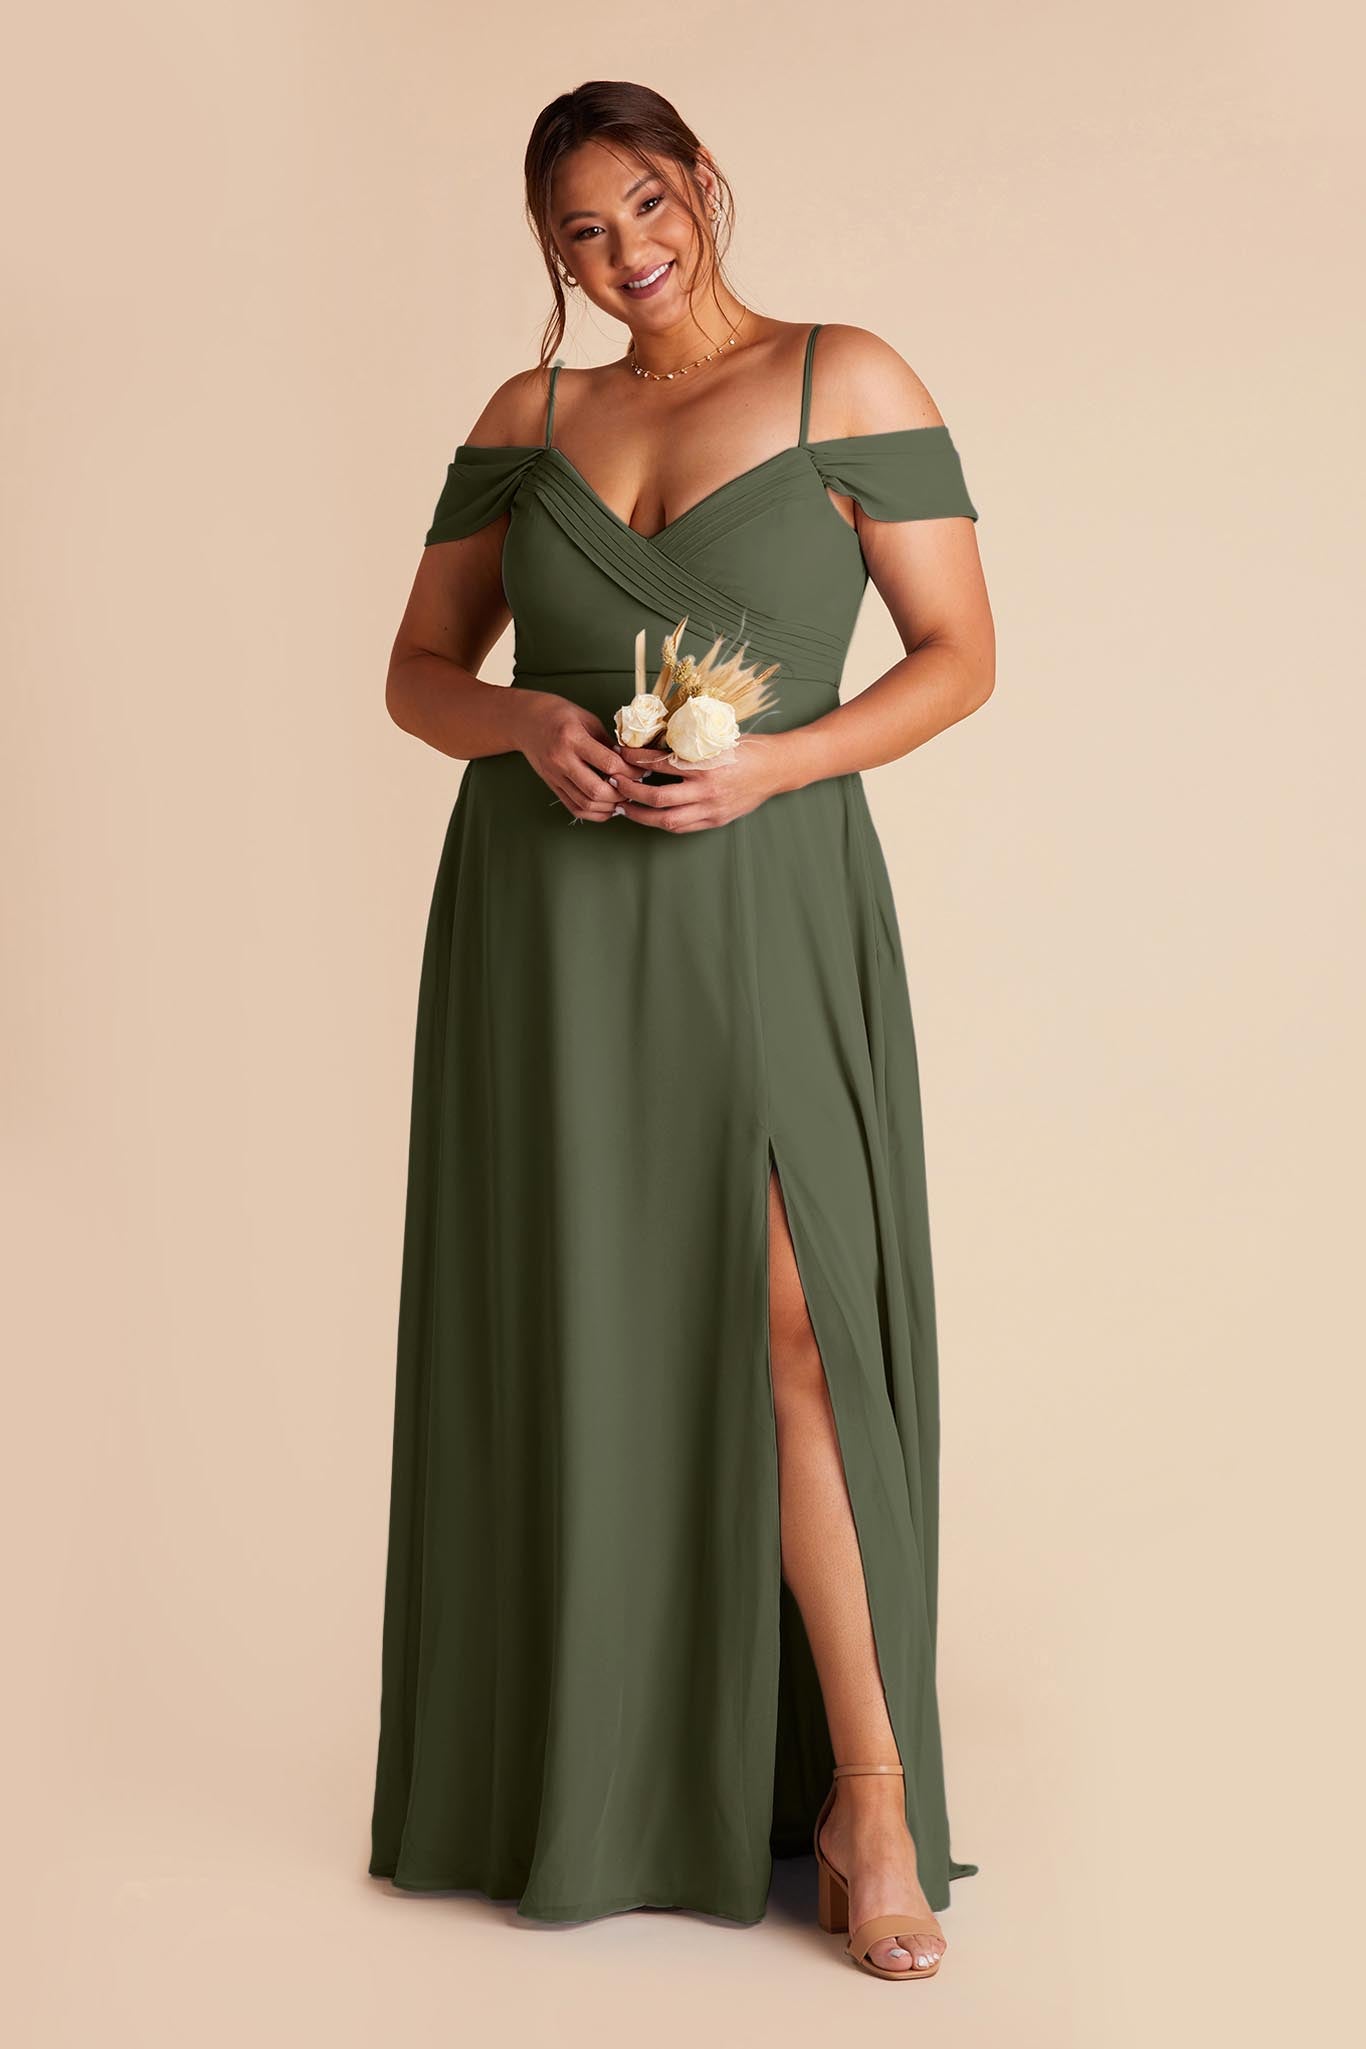 Spence Convertible Dress - Olive